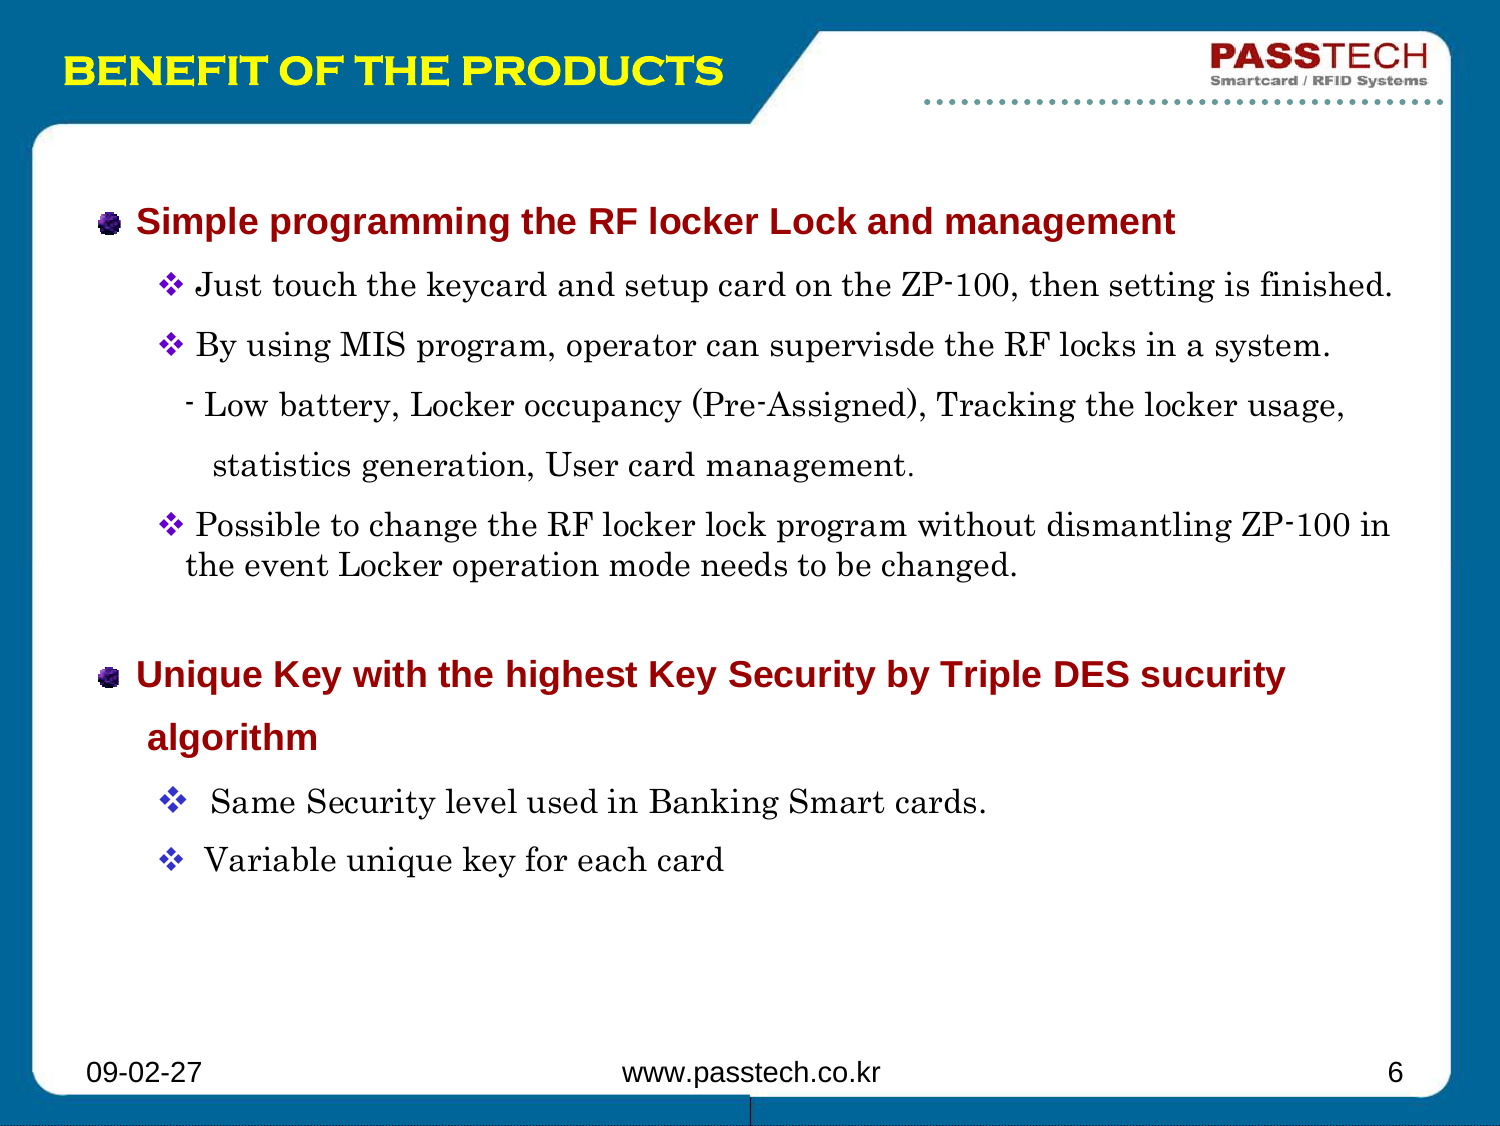 09-02-27 www.passtech.co.kr 6BENEFIT OF THE PRODUCTSSimple programming the RF locker Lock and managementJust touch the keycard and setup card on the ZP-100, then setting is finished.By using MIS program, operator can supervisde the RF locks in a system.- Low battery, Locker occupancy (Pre-Assigned), Tracking the locker usage, statistics generation, User card management.Possible to change the RF locker lock program without dismantling ZP-100 in the event Locker operation mode needs to be changed. Unique Key with the highest Key Security by Triple DES sucurityalgorithmSame Security level used in Banking Smart cards.Variable unique key for each card